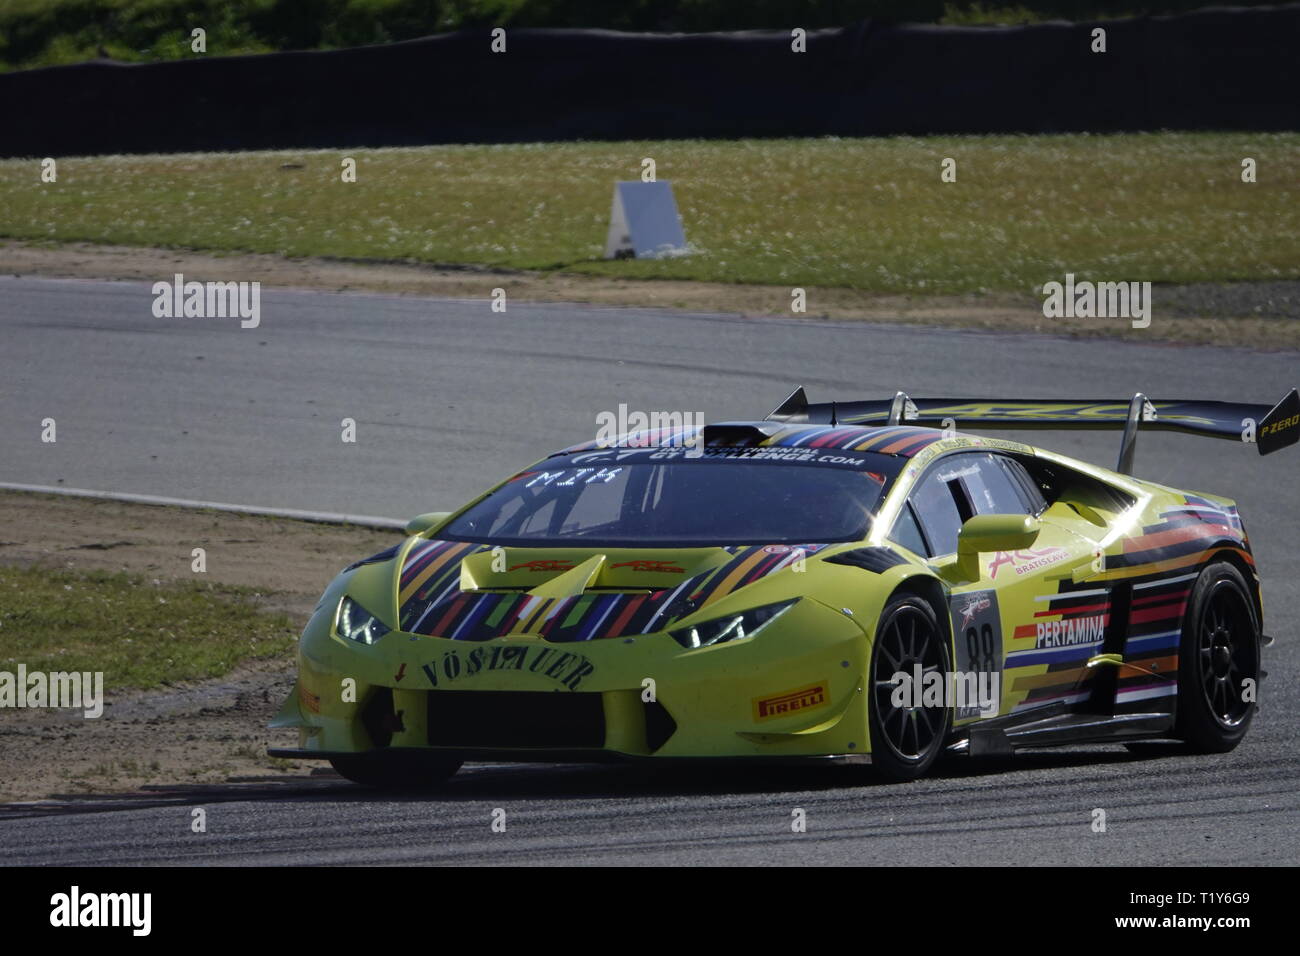 Laguna Seca Raceway, Monterey, CA, USA. 28th Mar, 2019. Scenes from the practice sessions for the 8 hour race in the Intercontinental GT Challenge Series scheduled for Saturday 30th March, 2019 Here the Lamborghini Huracan of Miroslav Konopka Credit: Motofoto/Alamy Live News Stock Photo